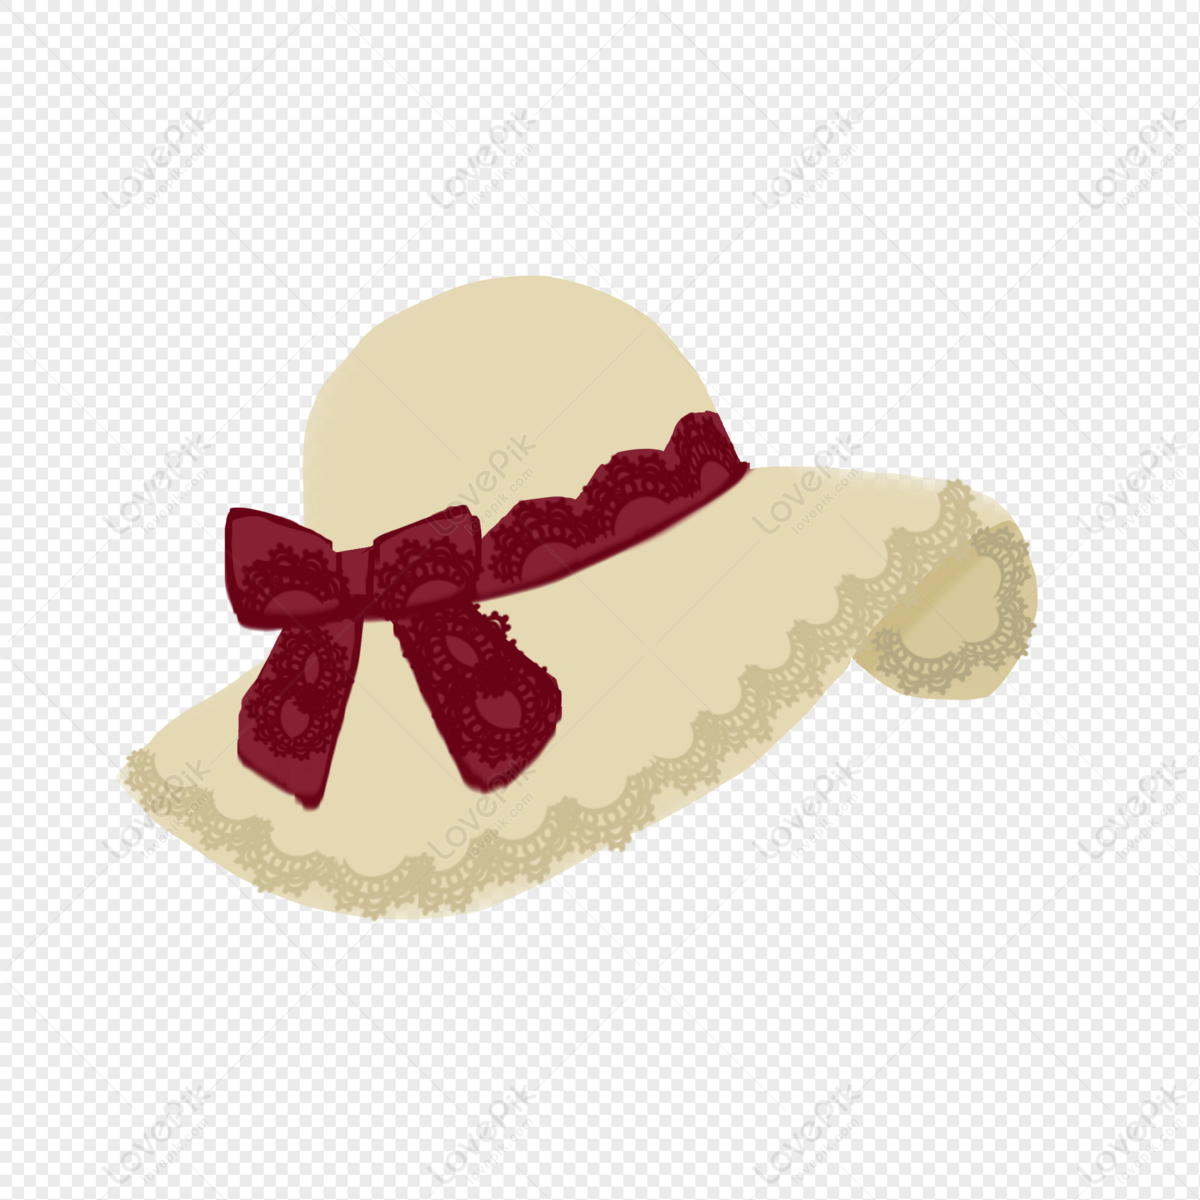 Sunhat PNG Image Free Download And Clipart Image For Free Download ...